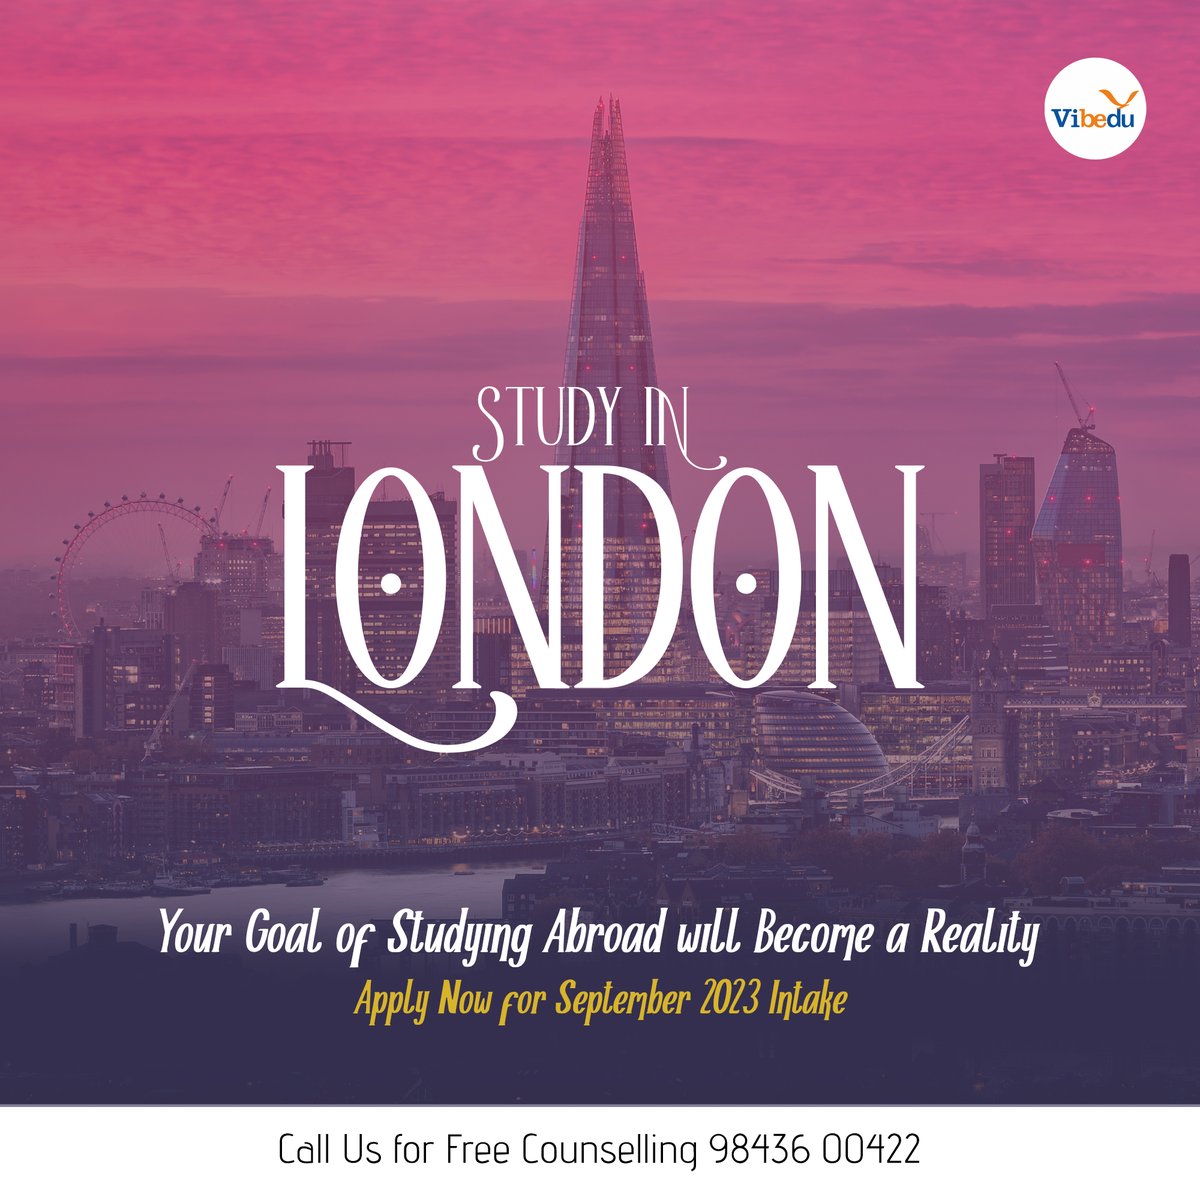 Choose London as your new Study Abroad Destination. Study with Scholarships in the UK today!  Apply now for May and September 2023 intake.

#studyinuk #unitedkingdom #studyinlondon  #scholarships #studentvisas #overseaseducation #studyabroad #abroadstudies #goabroad #vibedu